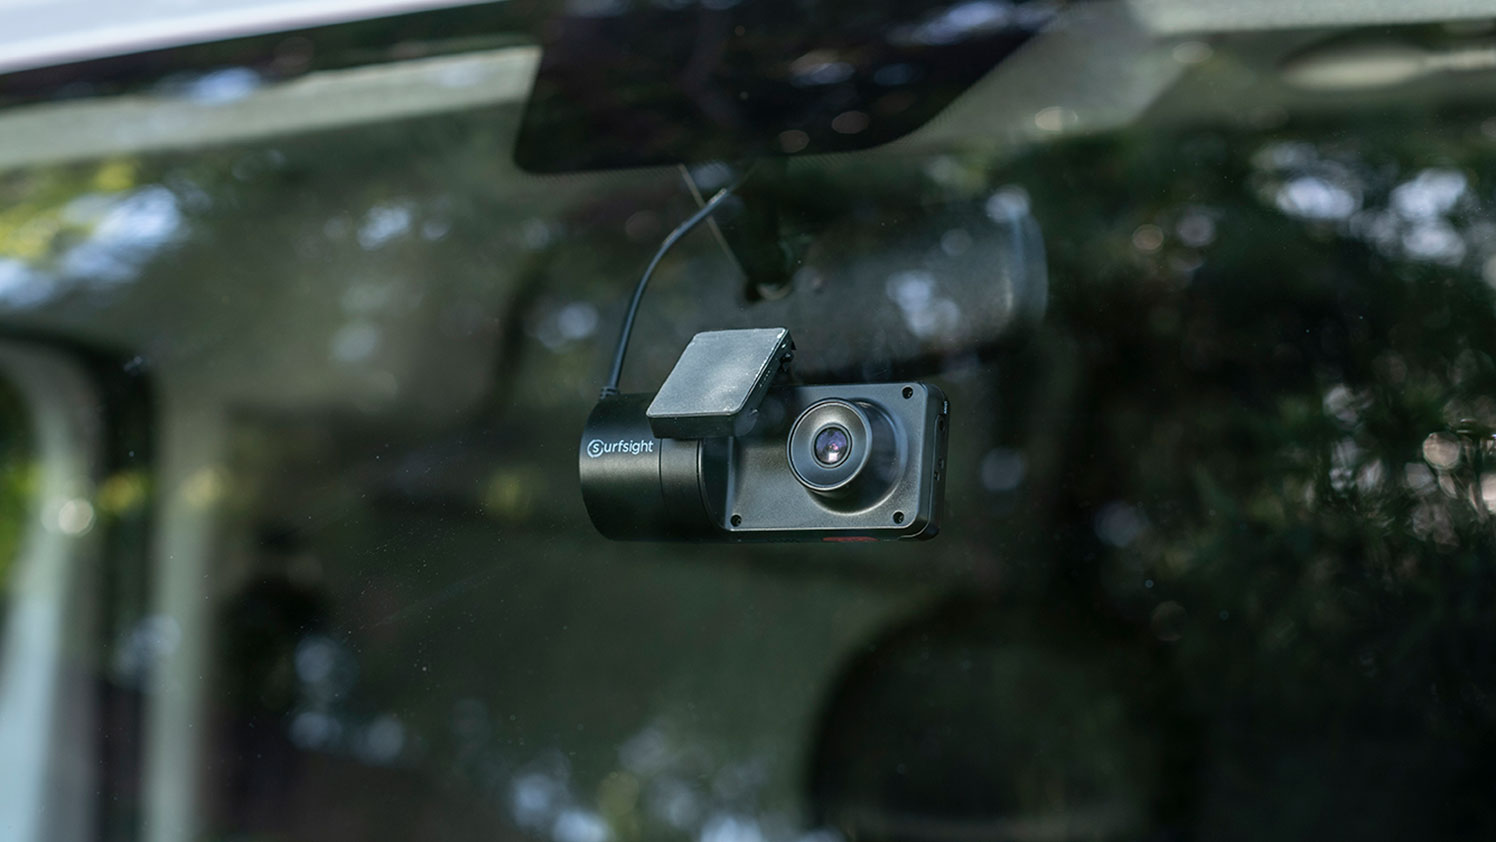 Fleet Dash Cams with GPS Tracking